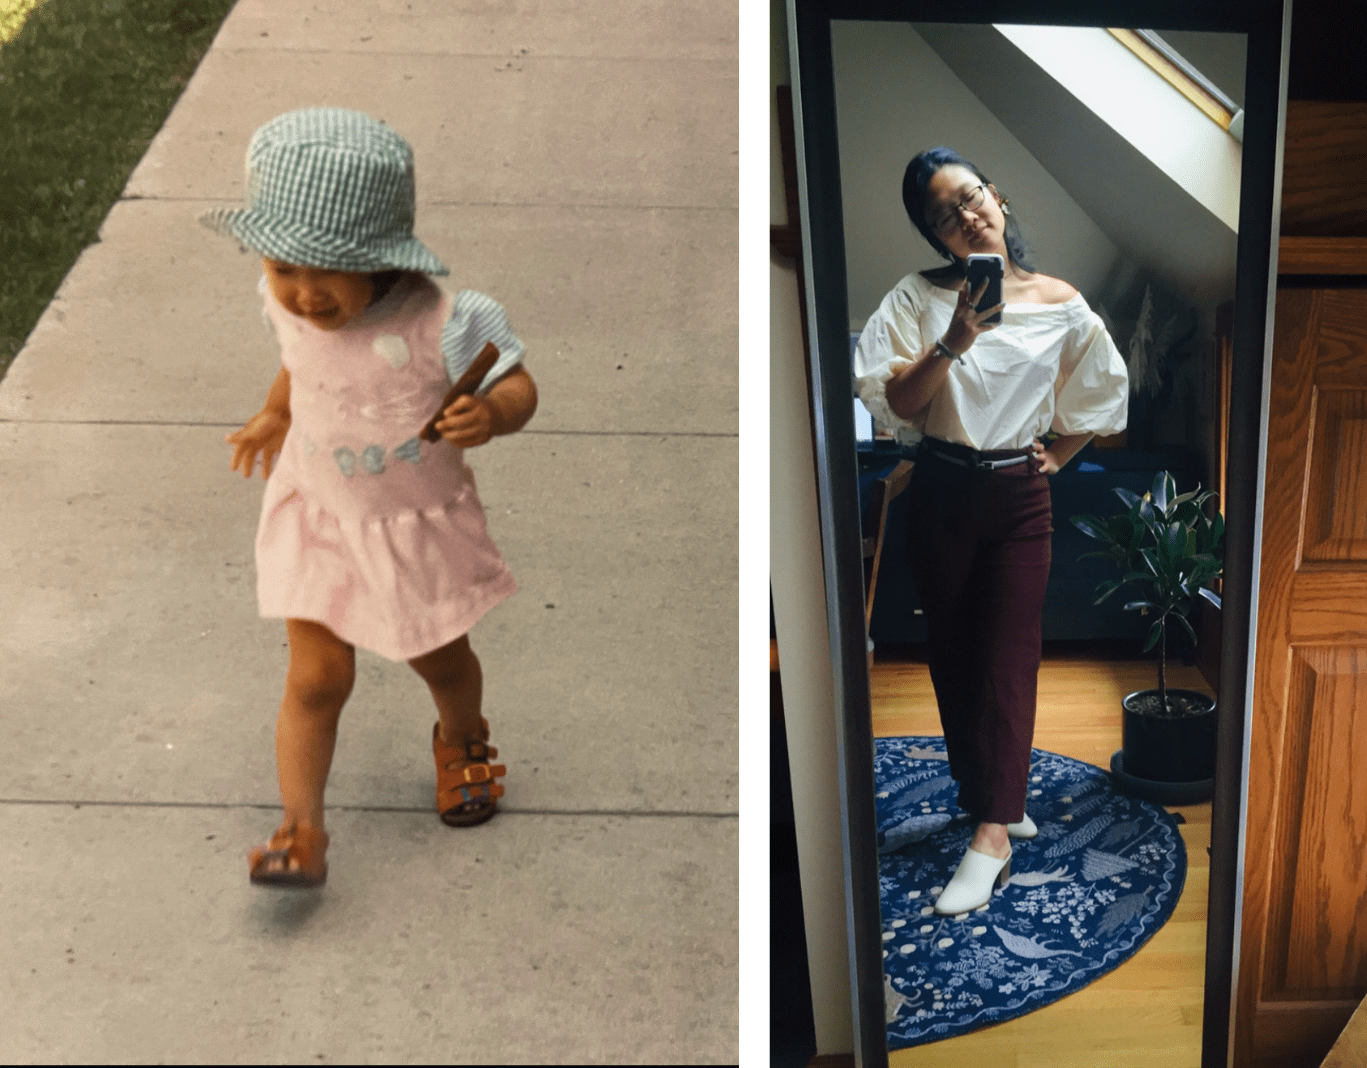 I Recreated 5 of My Favorite Childhood Outfits. Here's What I Came Up With...